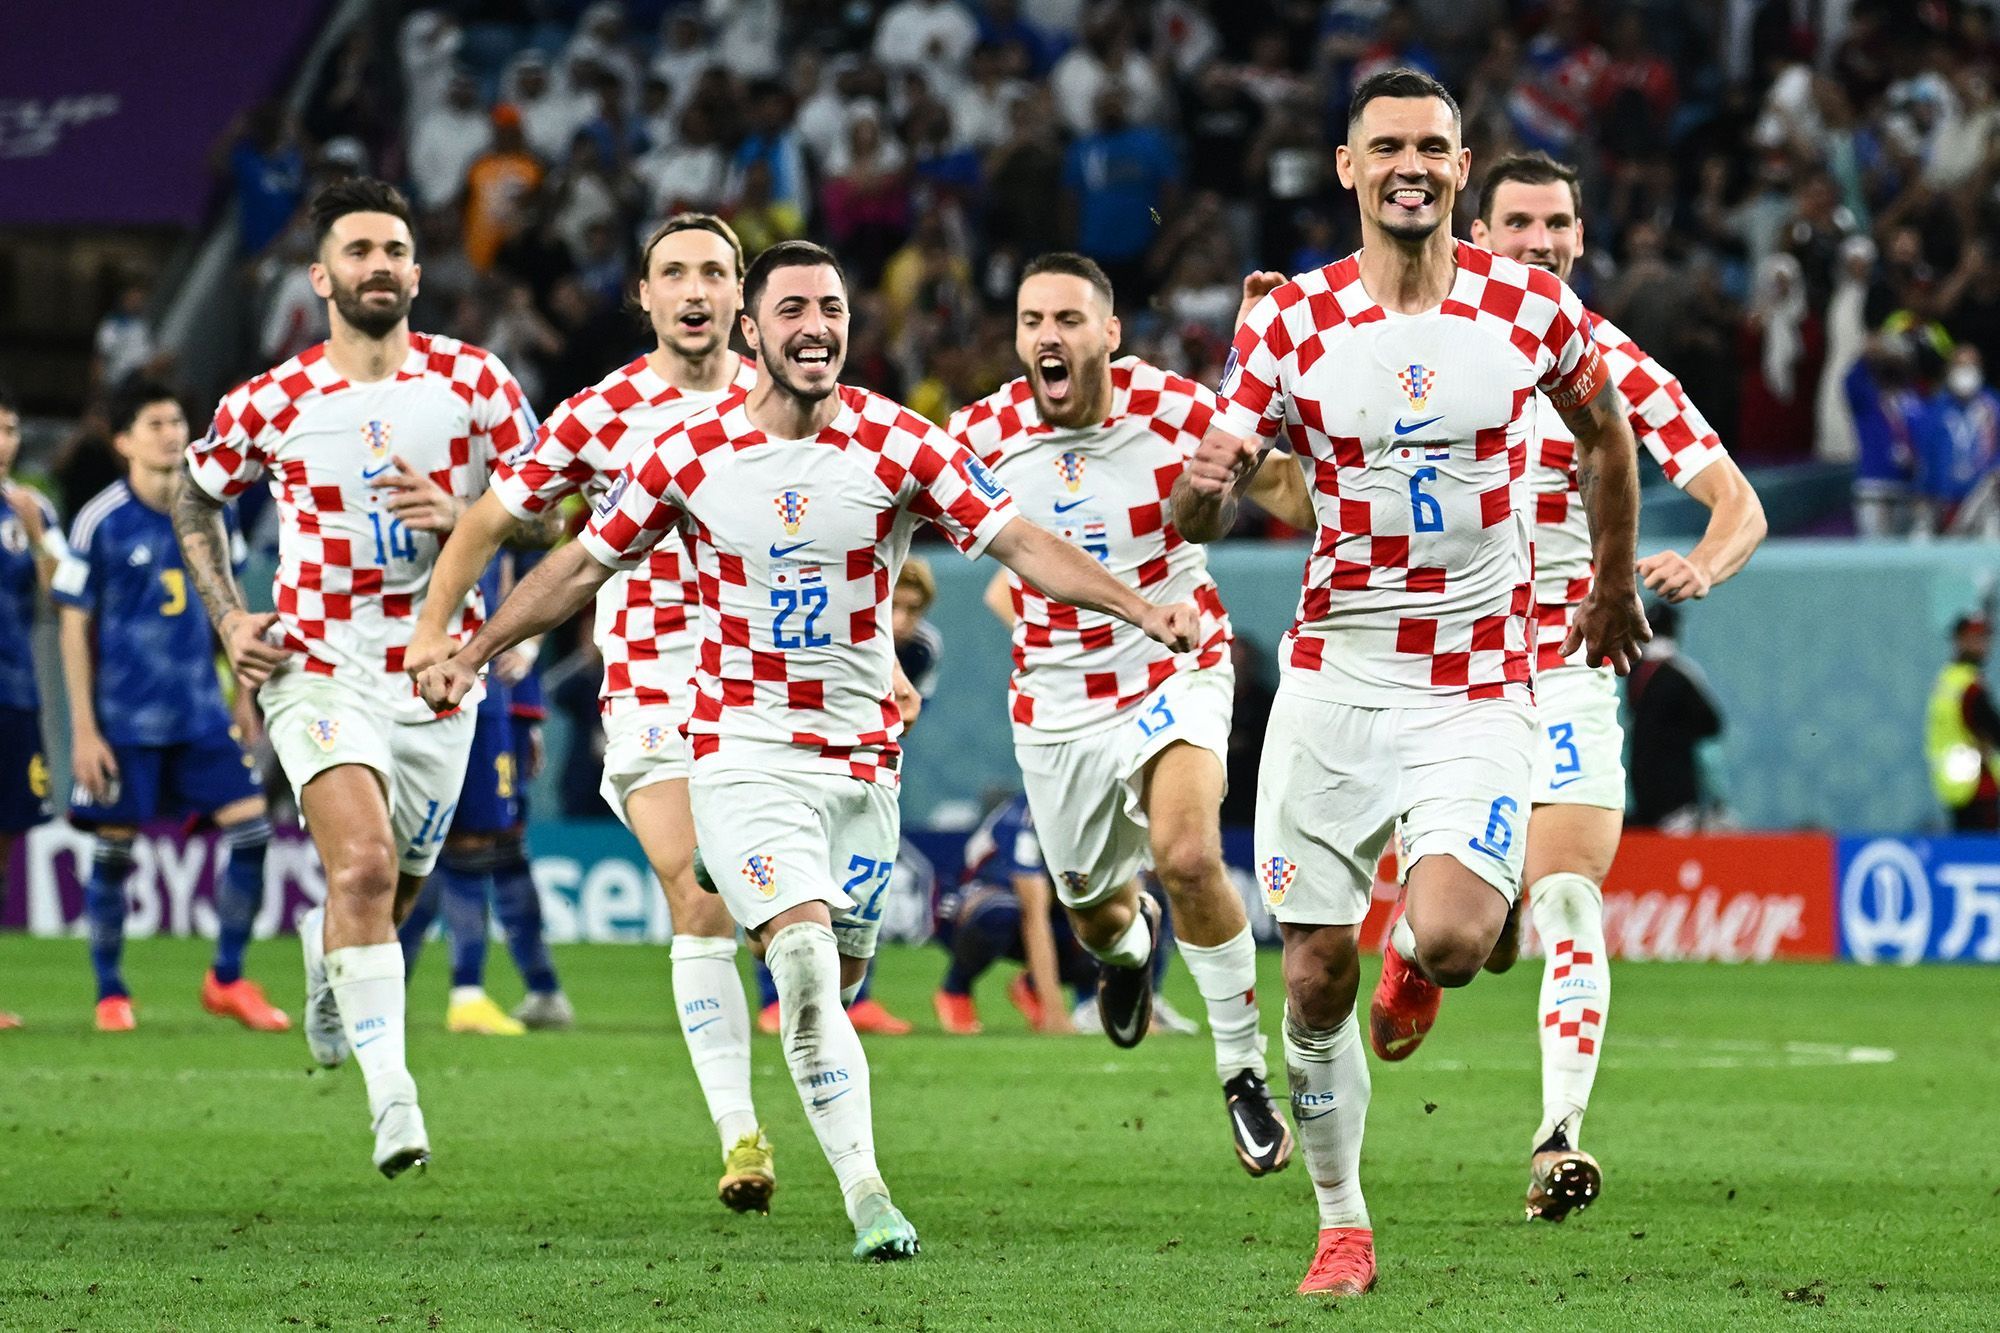 Croatian journalist says Modrić, Perišić and Lovren cannot leave the 2022 World Cup with nothing